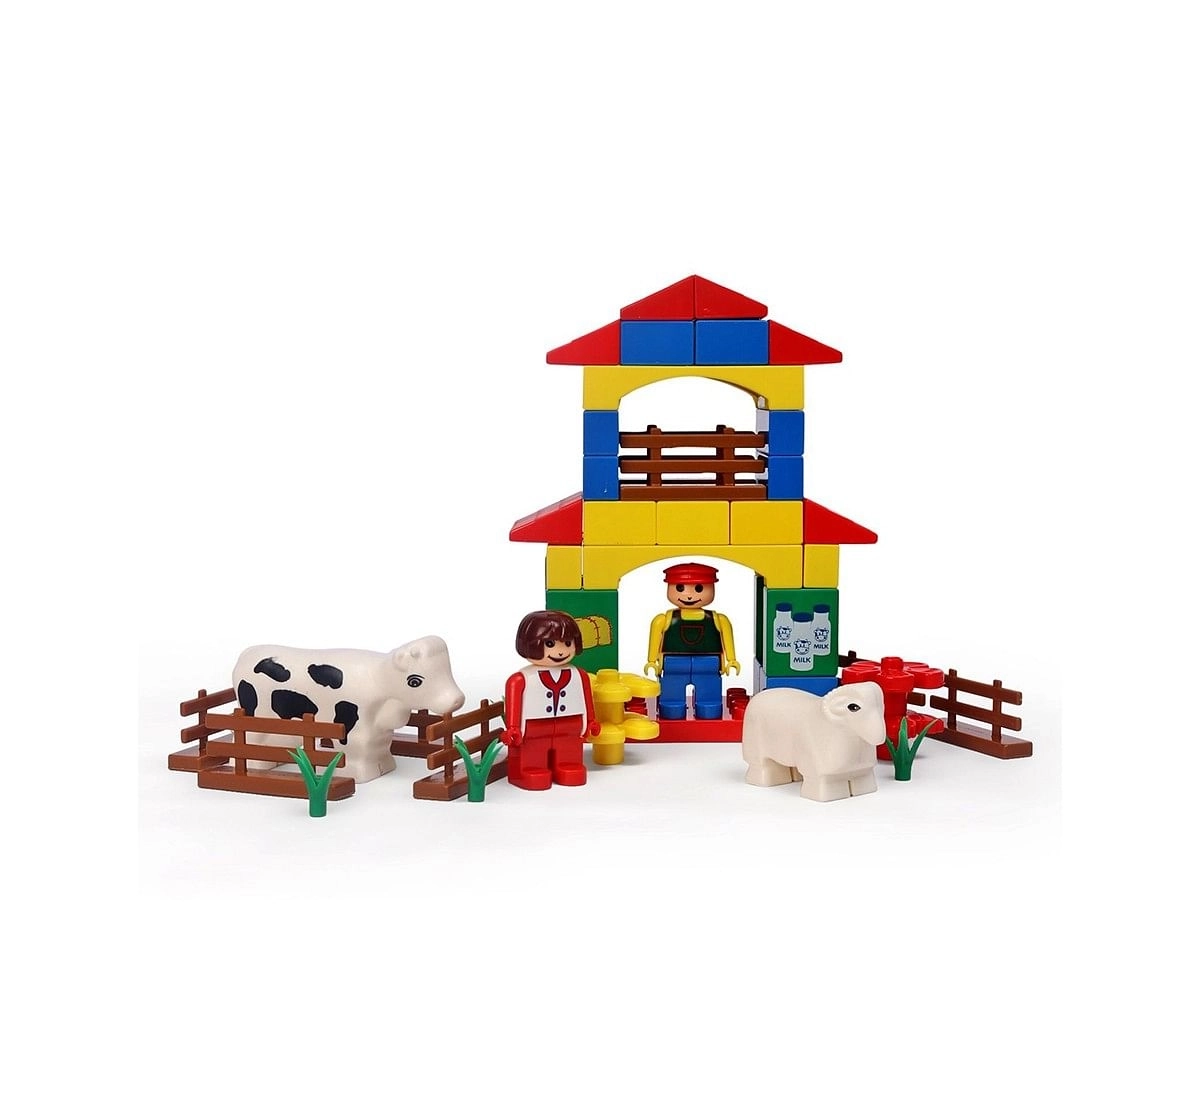 Peacock Kinder Farm House Generic Blocks for Kids age 3Y+ 